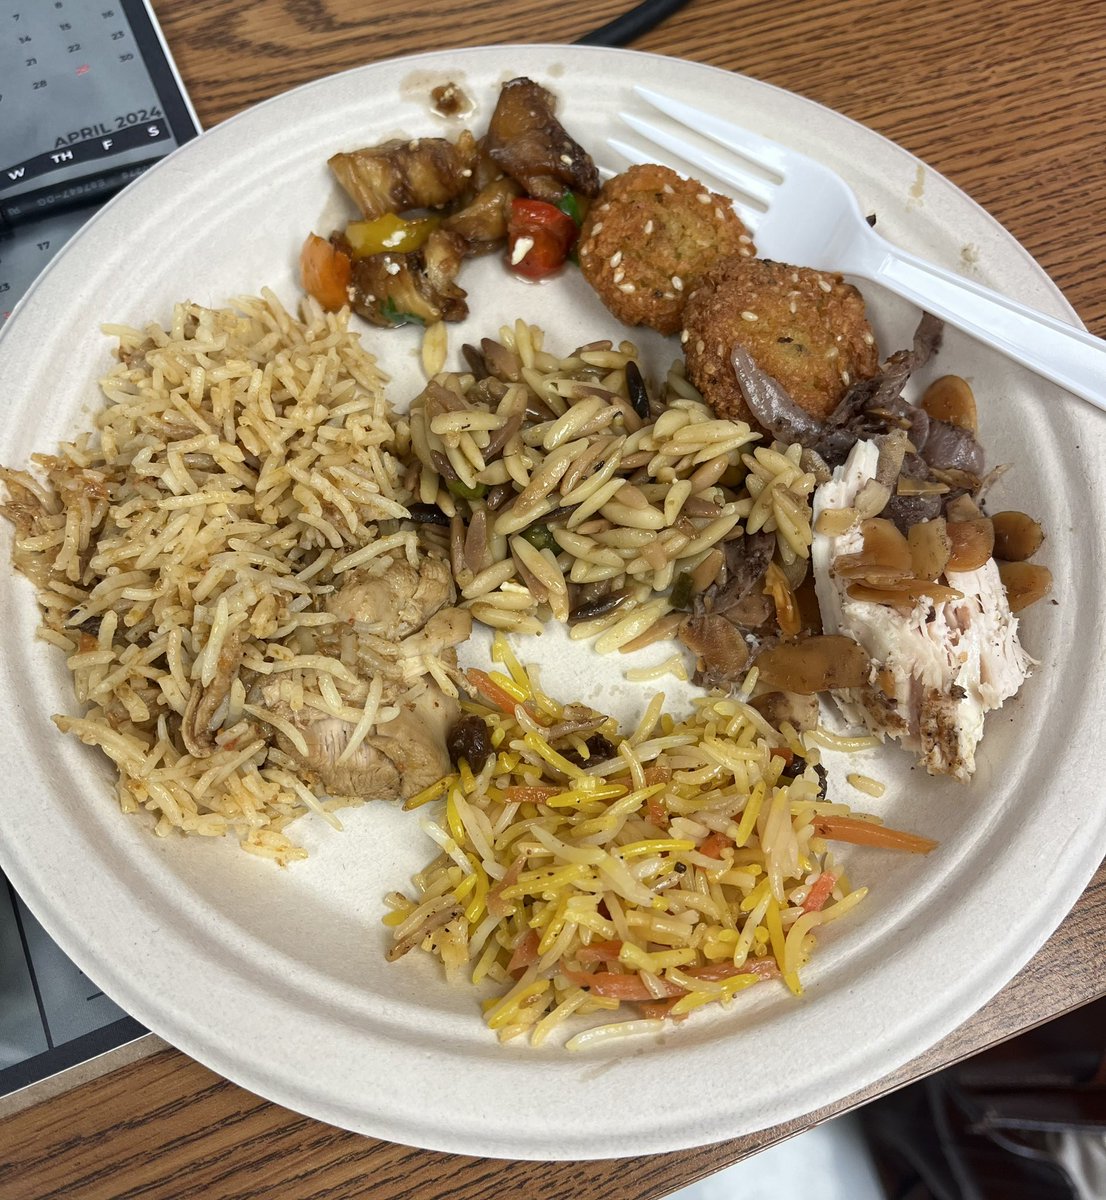 Some generous coworkers provided delicious lunch in honor of the end of Ramadan and start of Eid! It smells and tastes amazing!